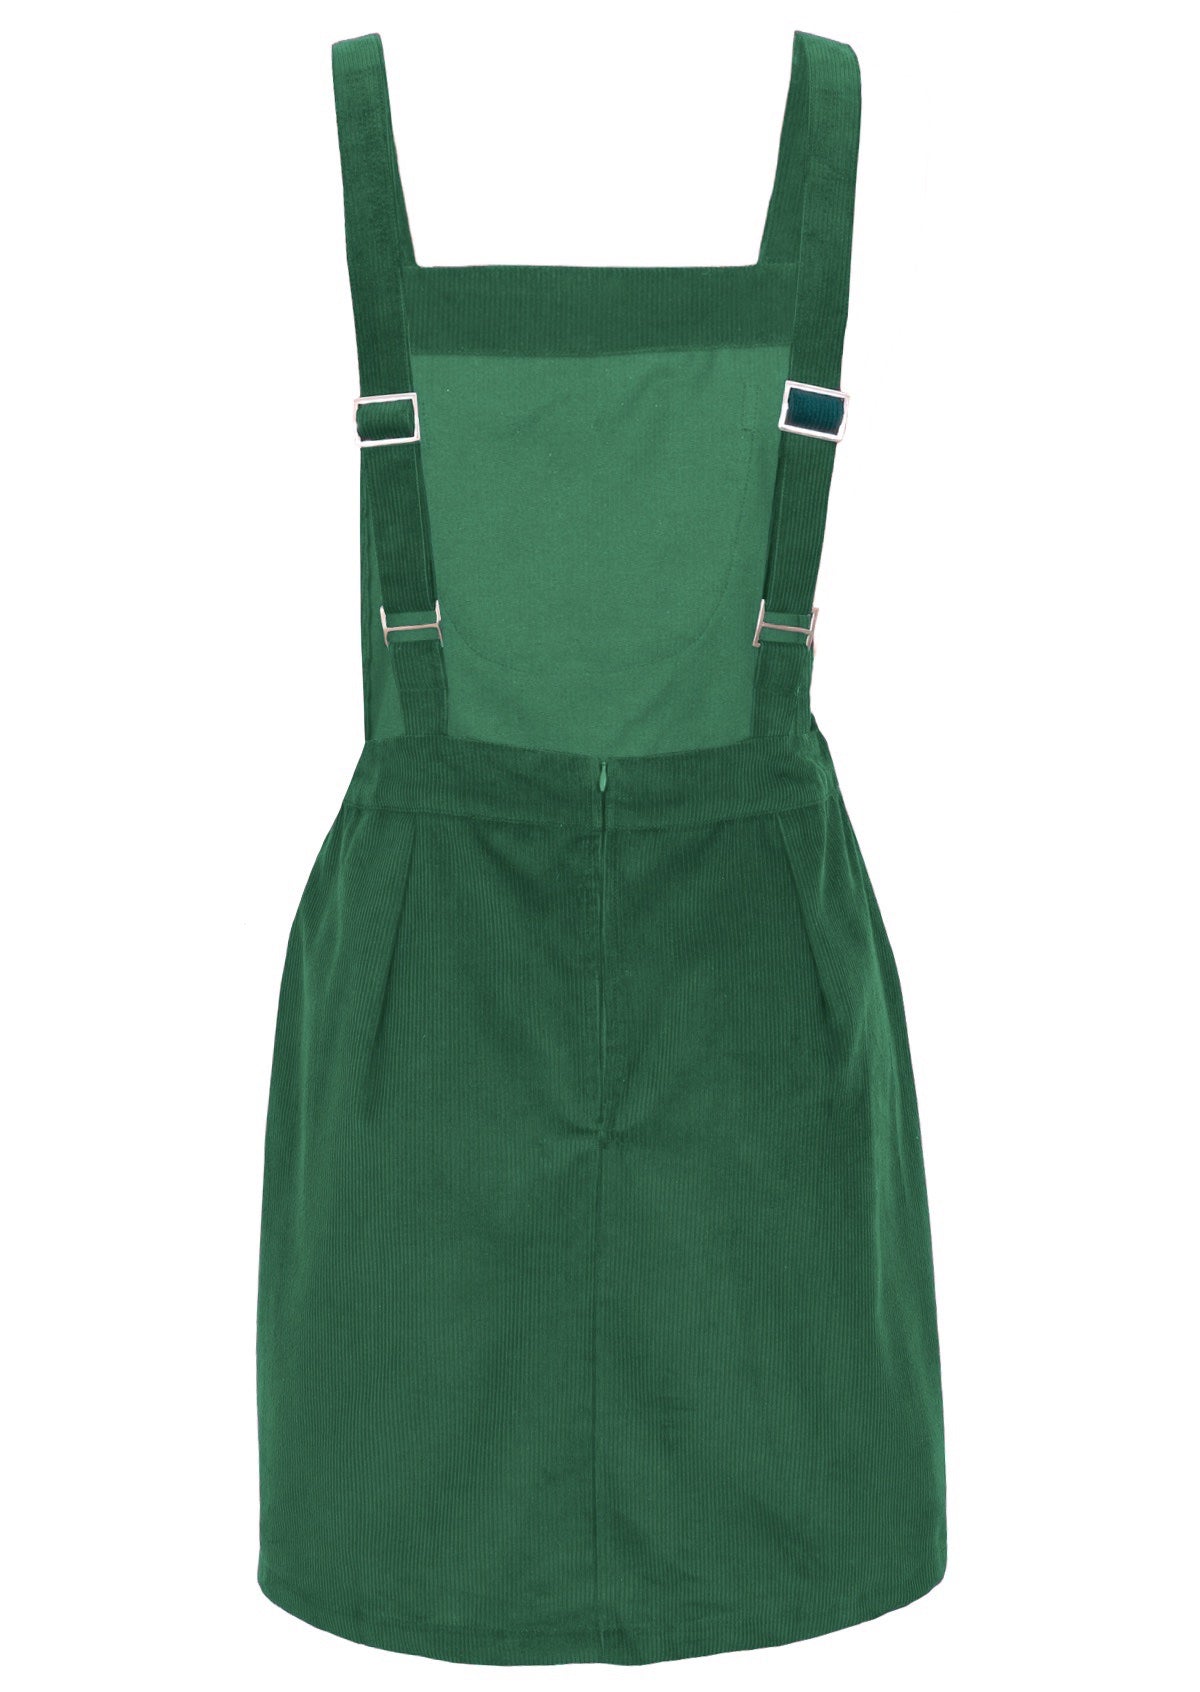 100% cotton corduroy pinafore has a zip in the back.